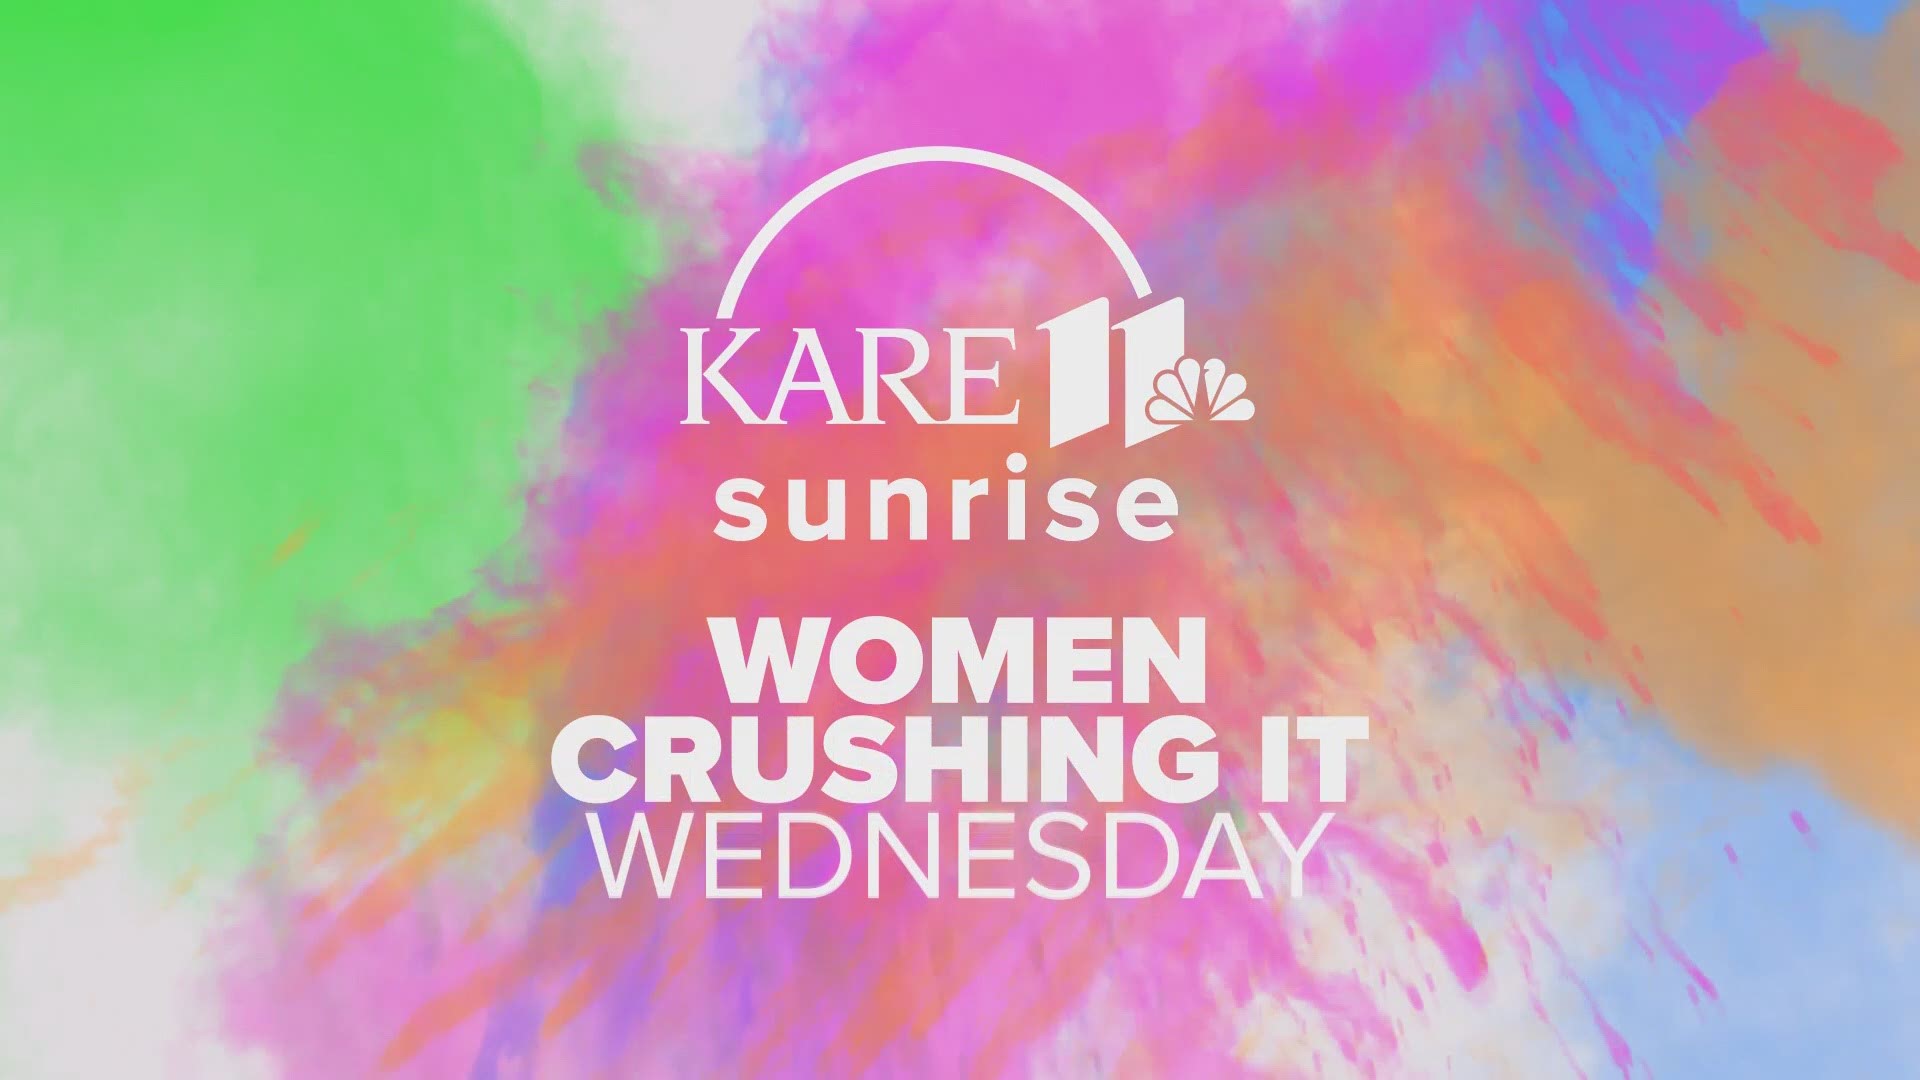 Wildhive Founder Mollie Krengel is this week's Women 'Crushing It Wednesday - her mission is to connect people with themselves through dance.